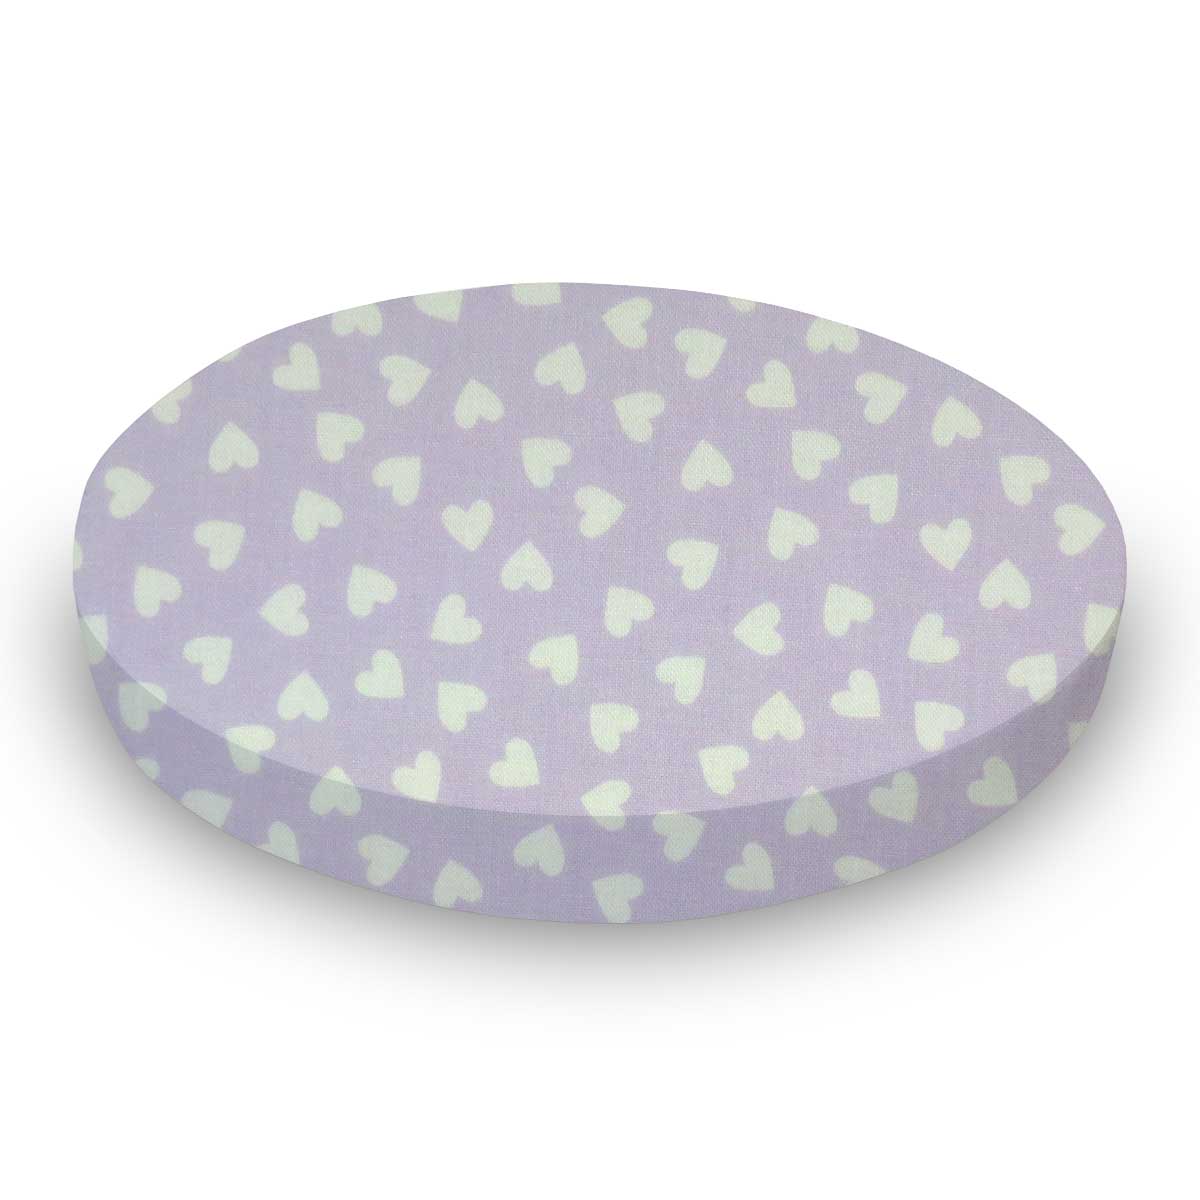 Oval Crib (Stokke Sleepi) - Hearts Pastel Lavender Woven - Fitted  Oval